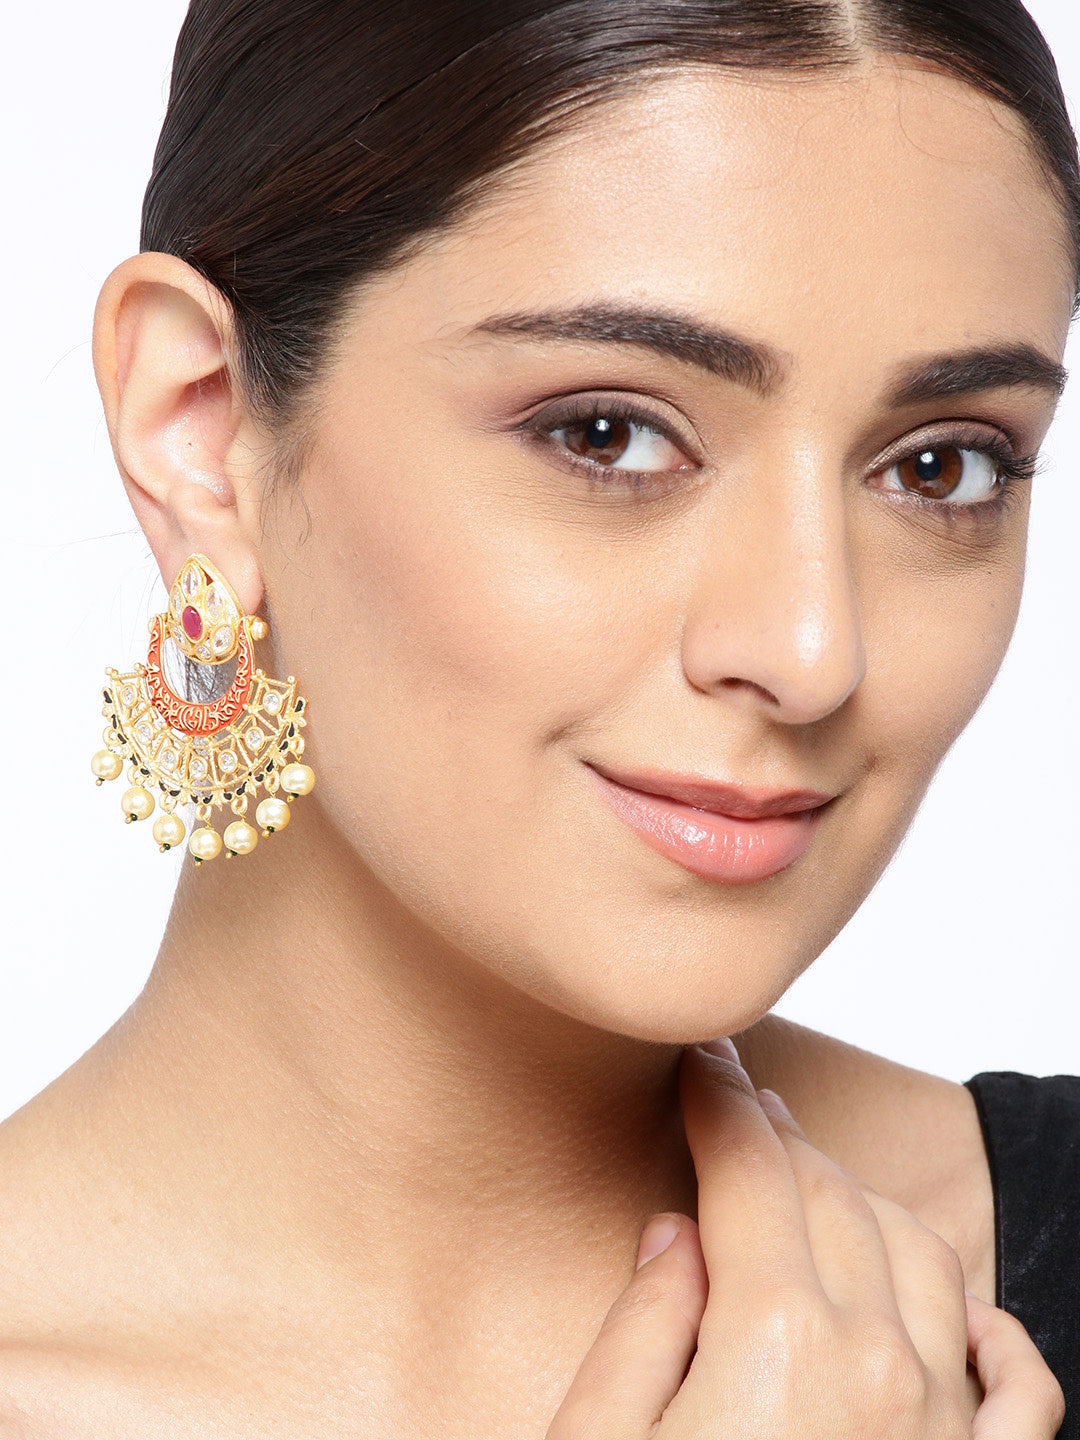 Gold-Plated Stones Studded Meenakari Drop Earrings in Red Color with Pearls Drop